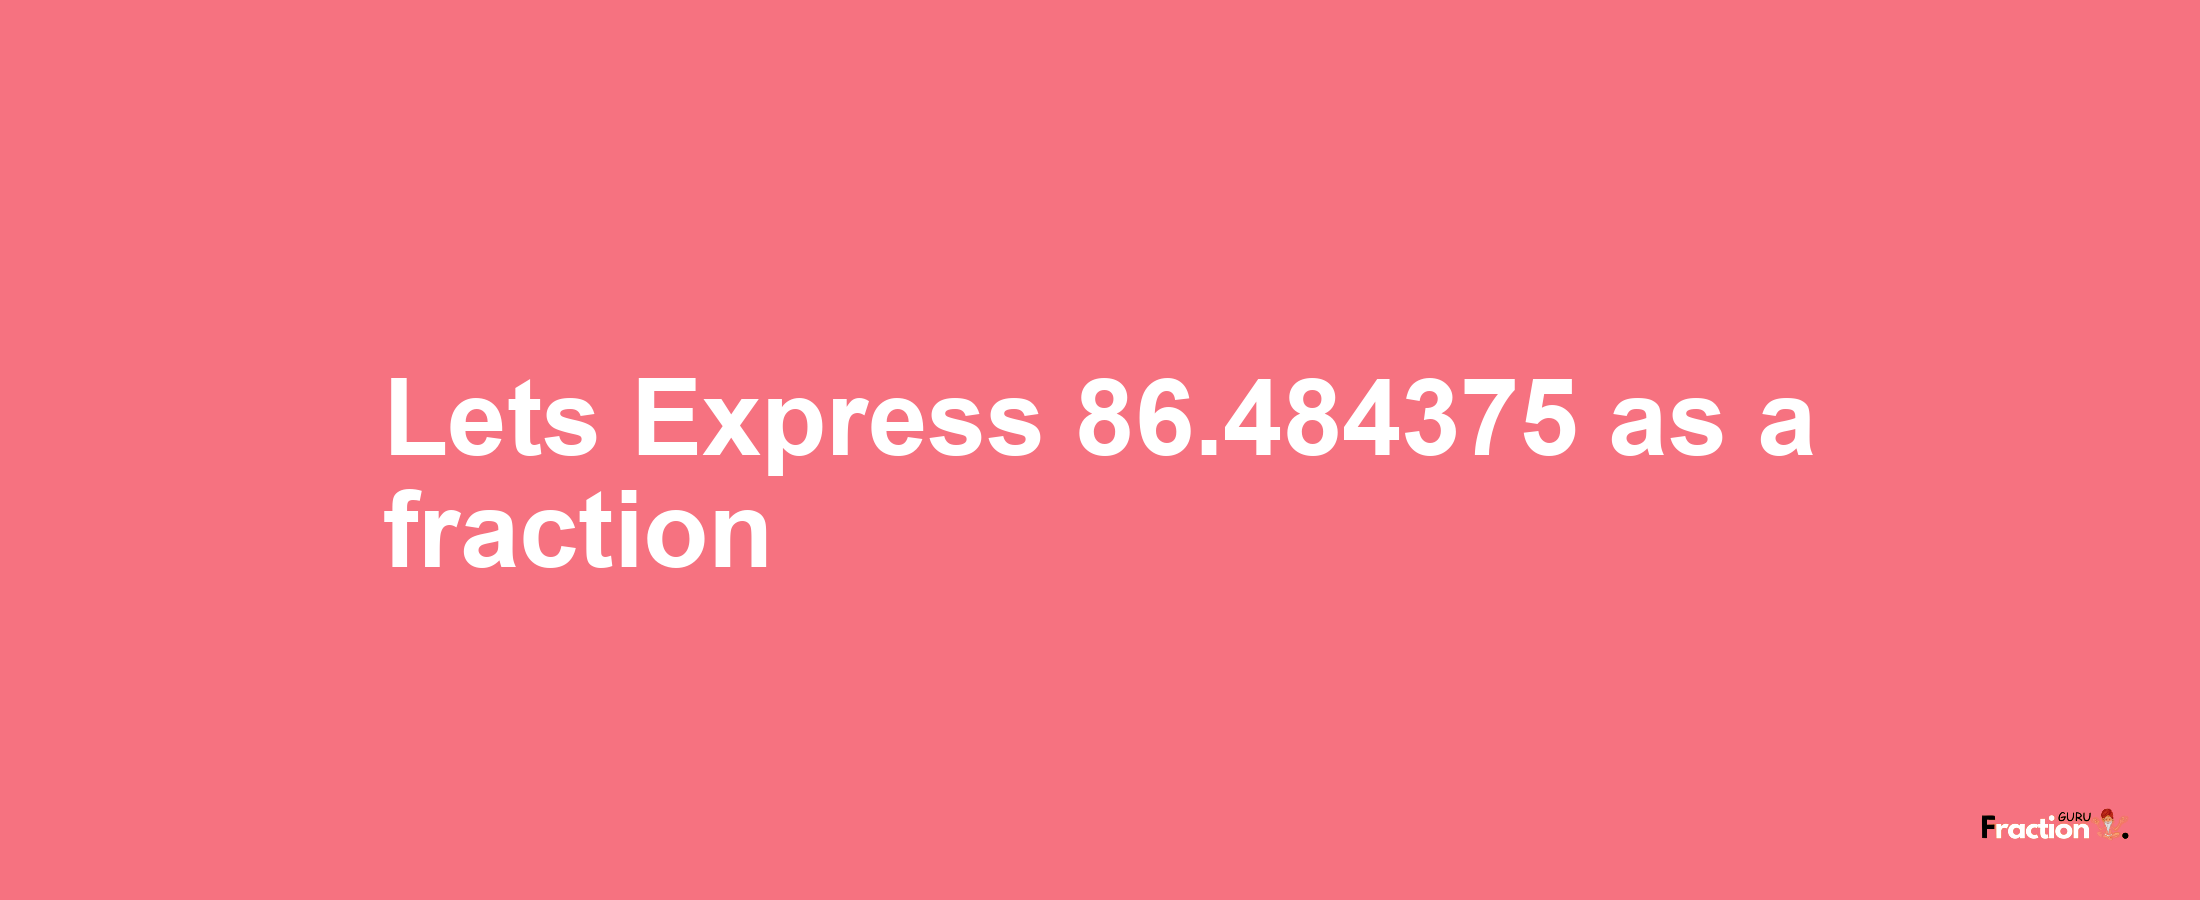 Lets Express 86.484375 as afraction